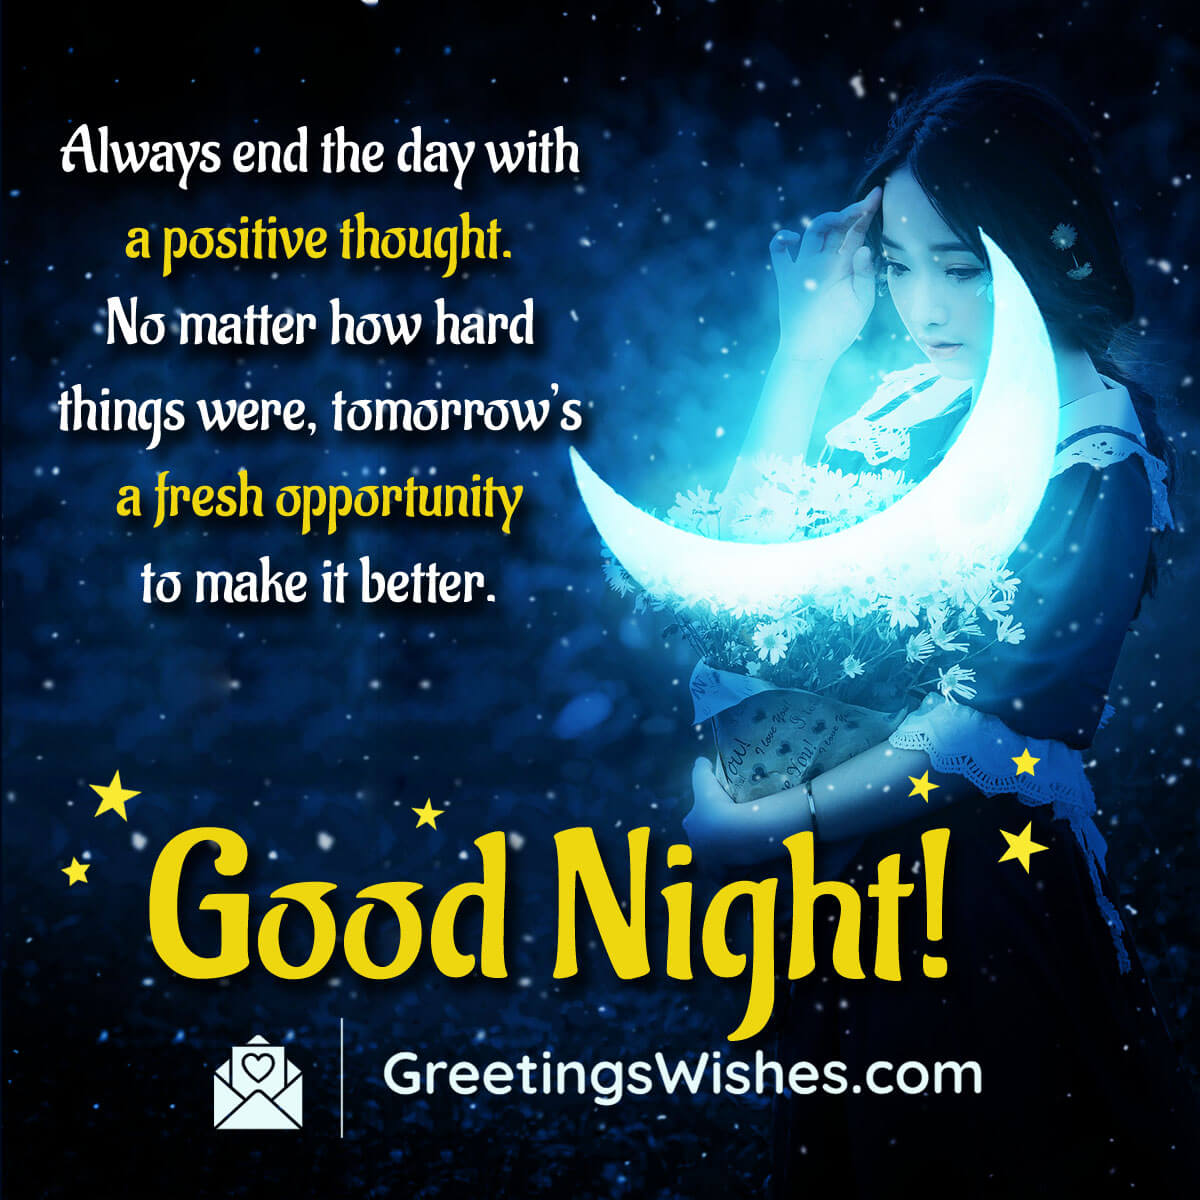 Good Night Positive Thought